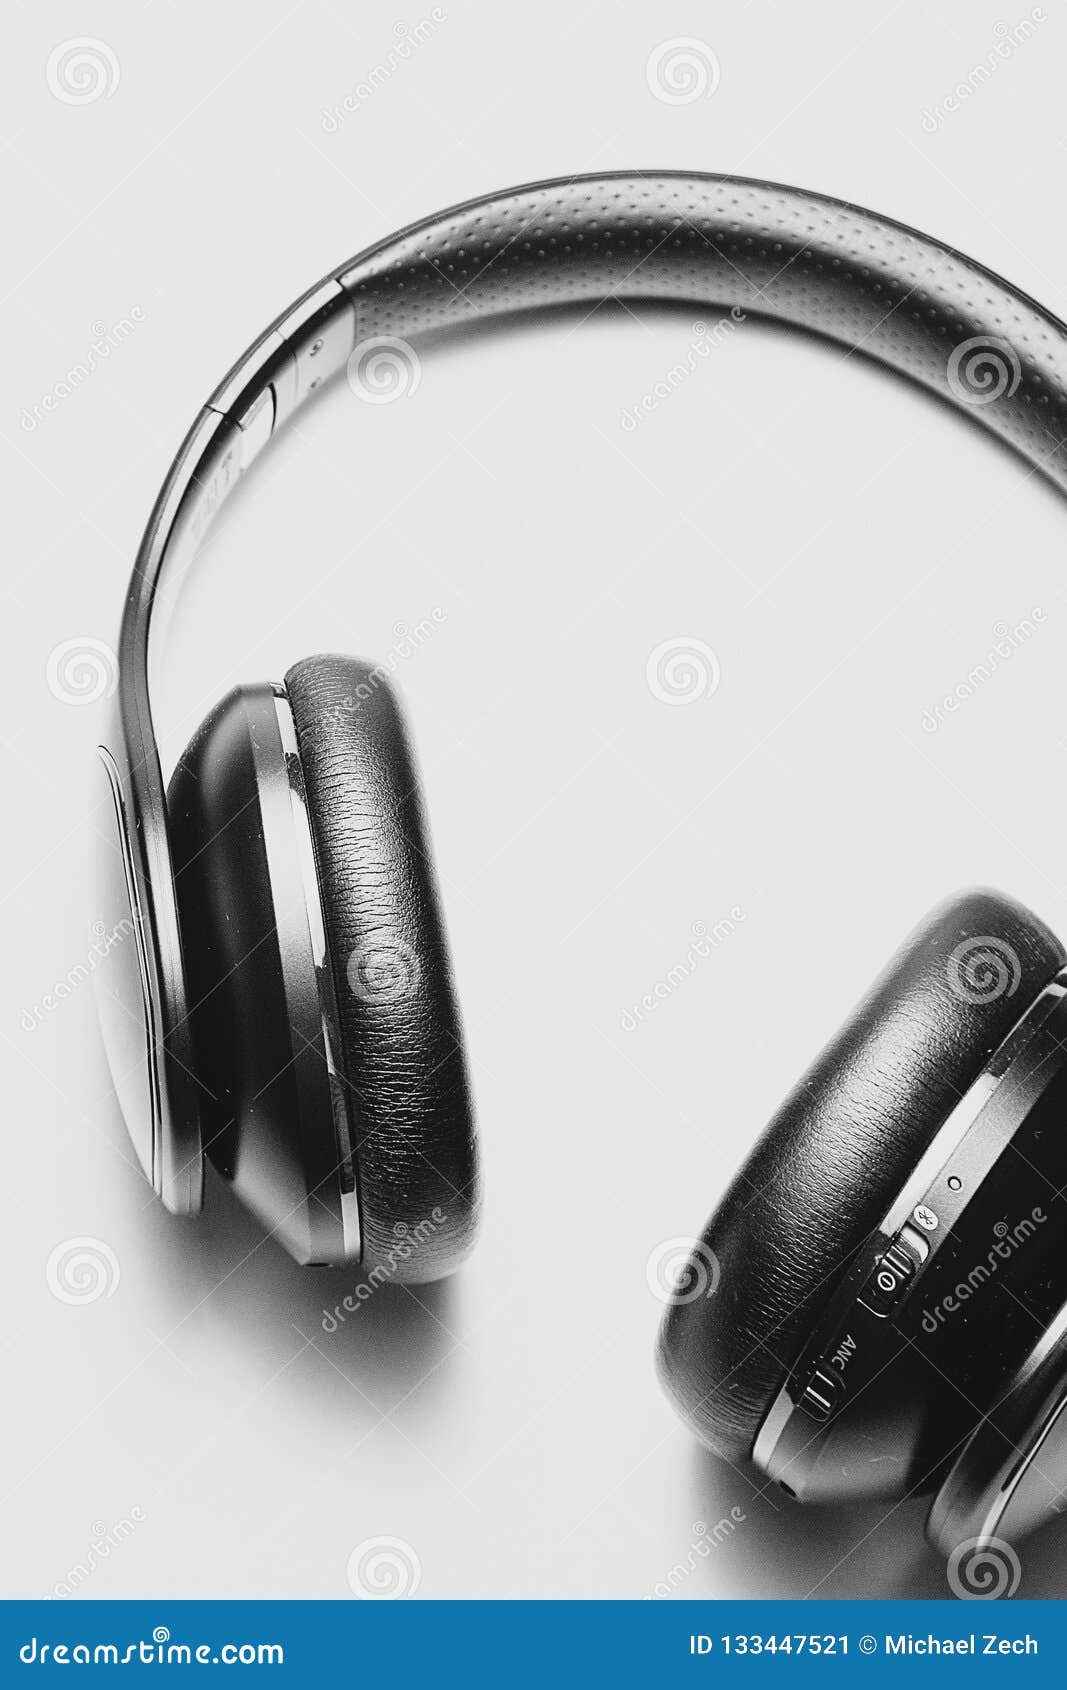 Close Up of Black Headphones Lying on a White Table Stock Image - Image ...